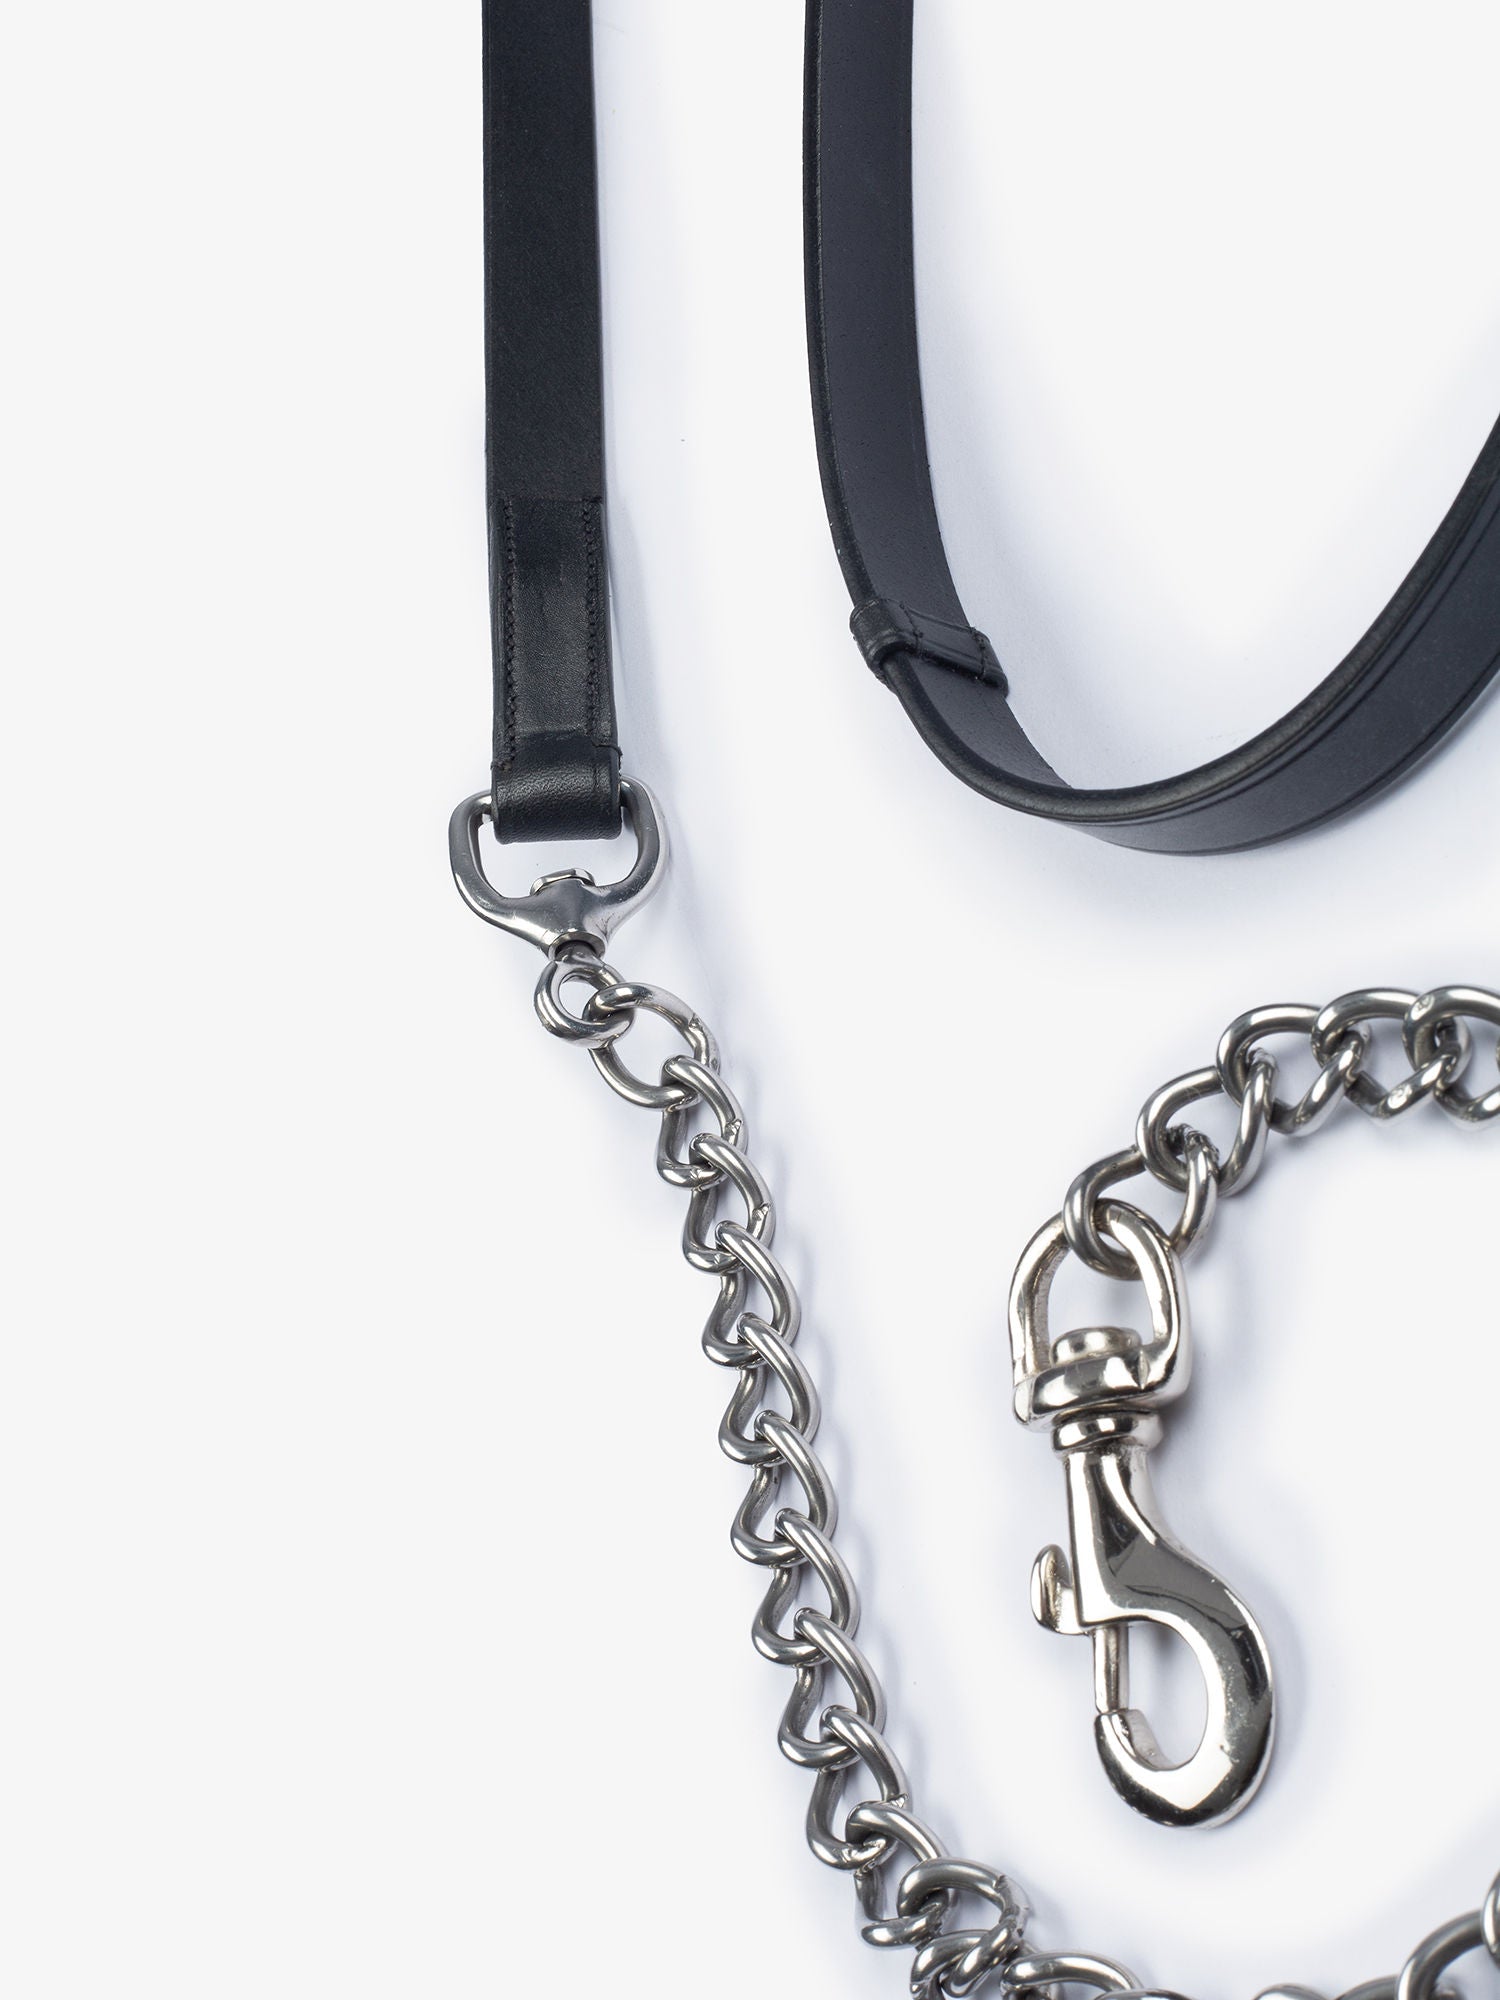 Chain Leap Rope - Brown & Black Leather